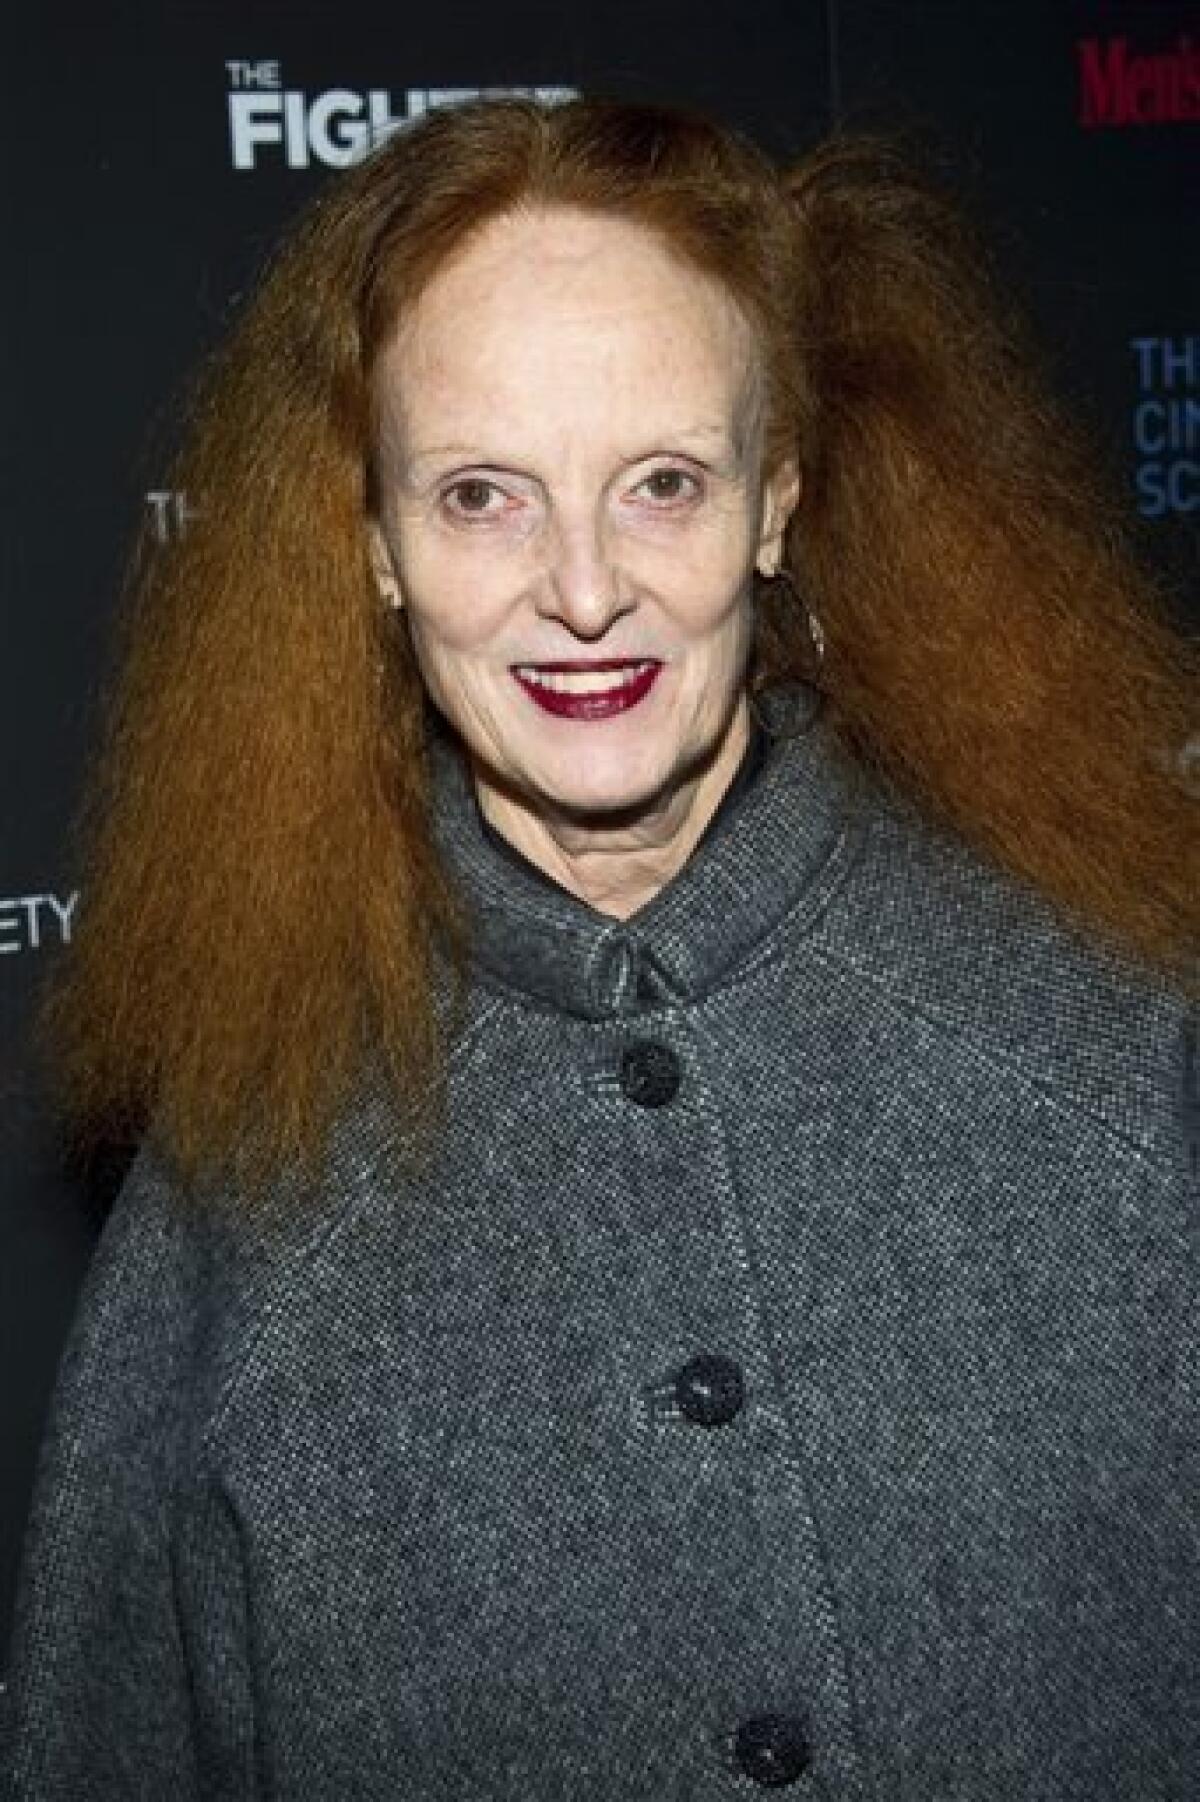 FILE- This Friday, Dec. 10, 2010 file photo shows Grace Coddington, the creative director of Vogue, as she attends a screening of "The Fighter" hosted by The Cinema Society in New York. Coddington's story from the front row of fashion will be told in a memoir. The as-yet-untitled book with be written in collaboration with Vanity Fair style editor-at-large Michael Roberts, a longtime friend and colleague. It will include some of Coddington's own illustrations. (AP Photo/Charles Sykes)